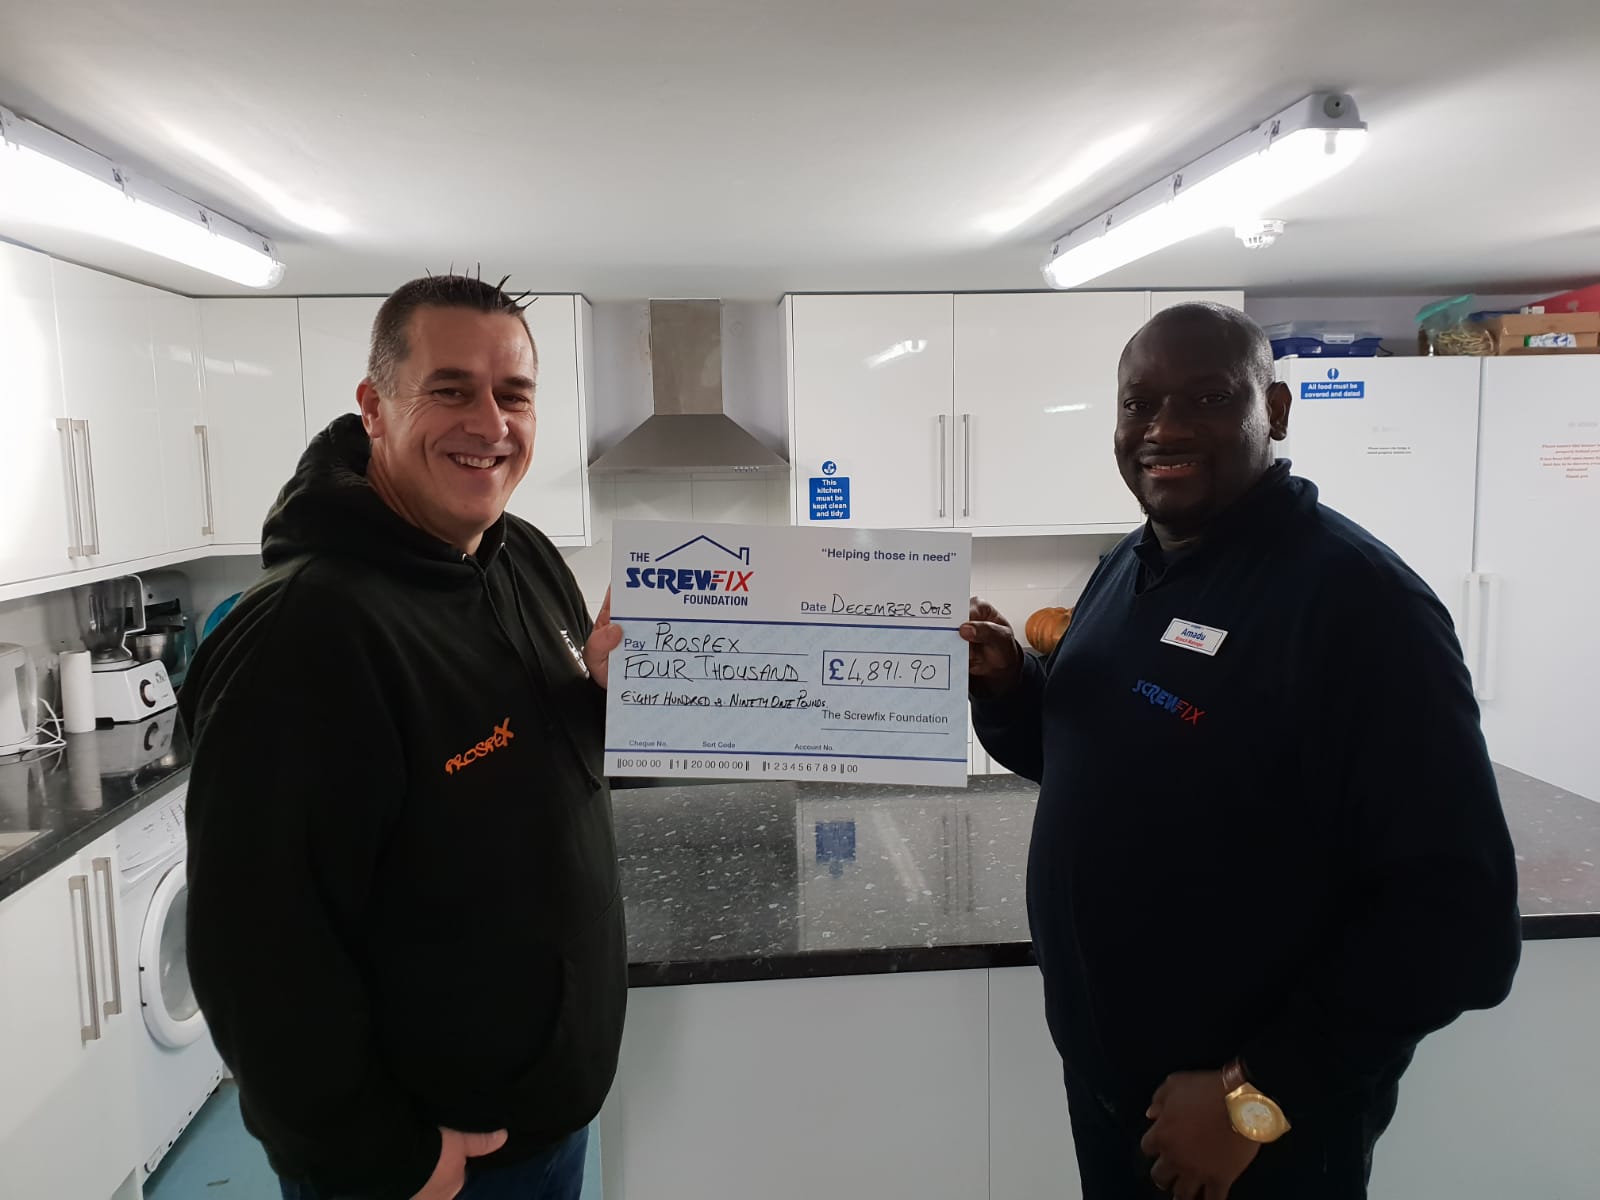 The Screwfix Foundation supports Prospex in Islington